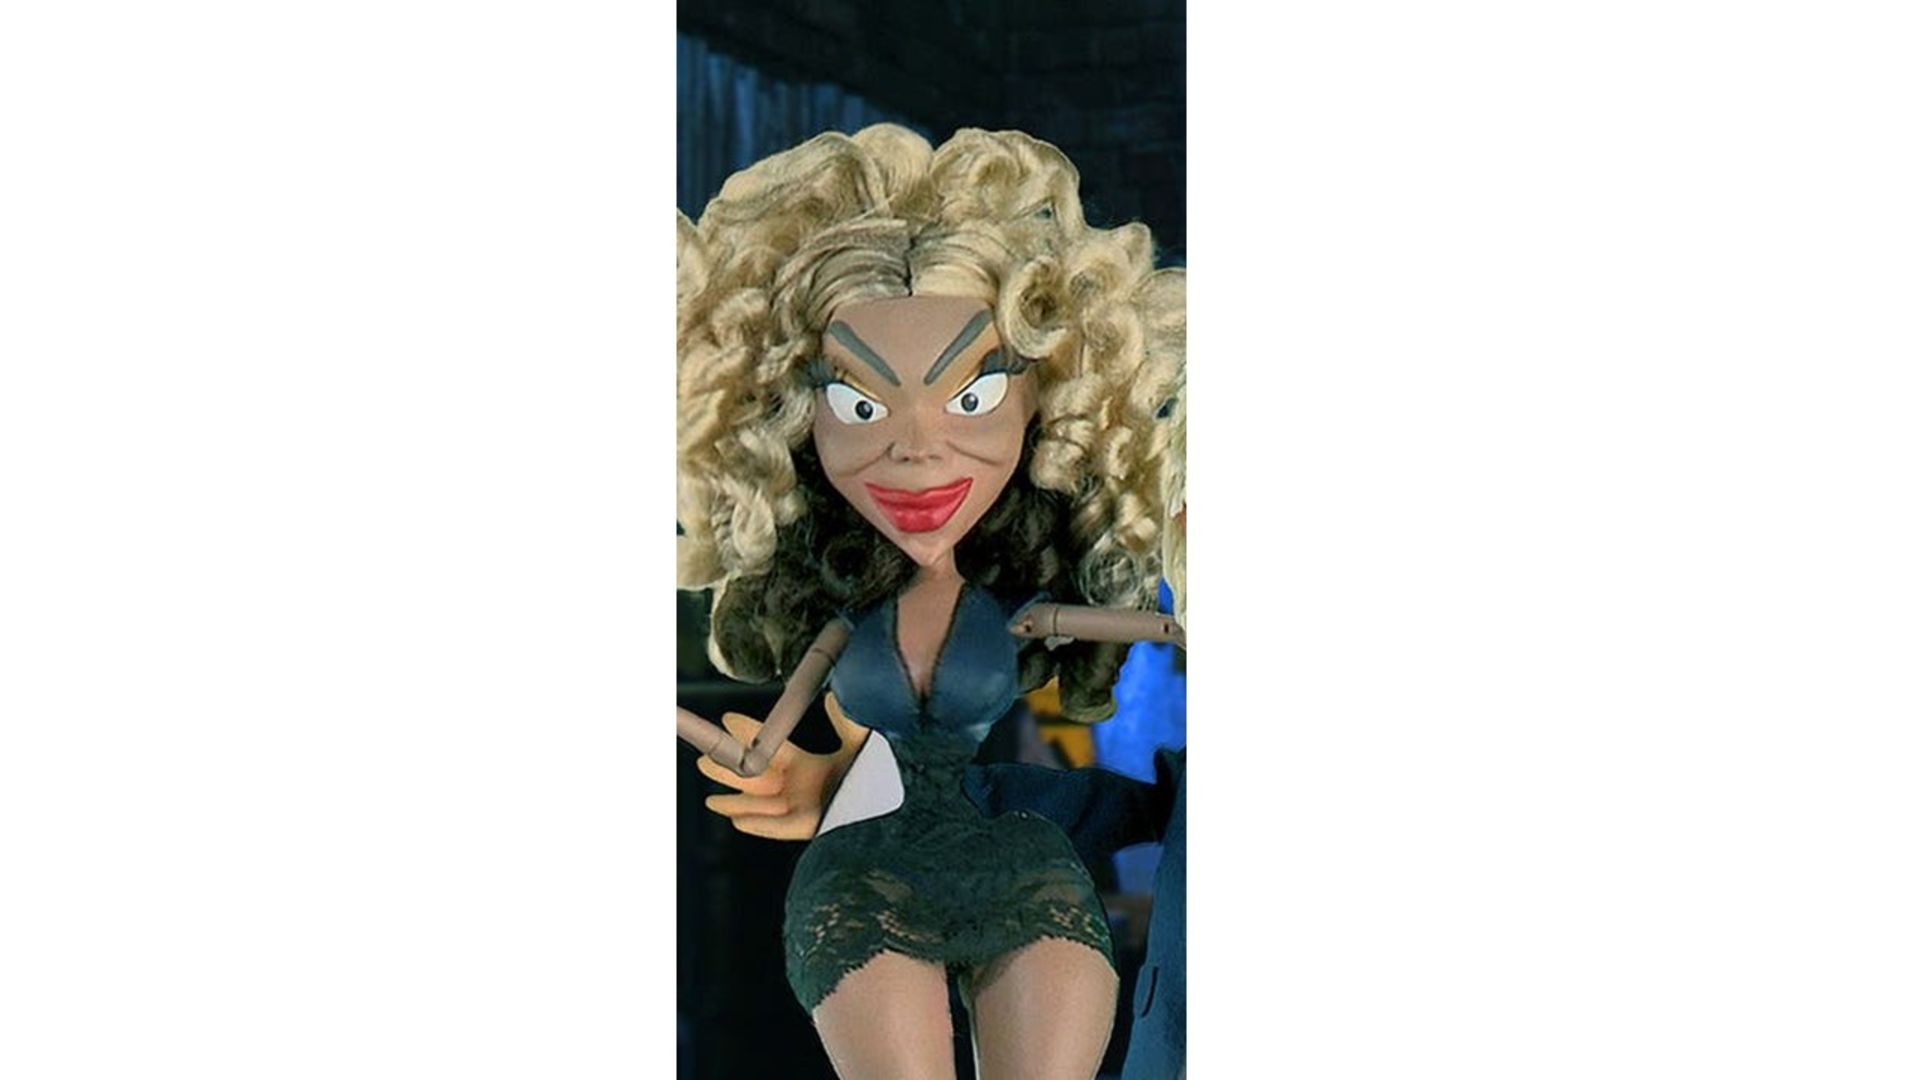 Newzoid puppet - Beyoncé Knowles